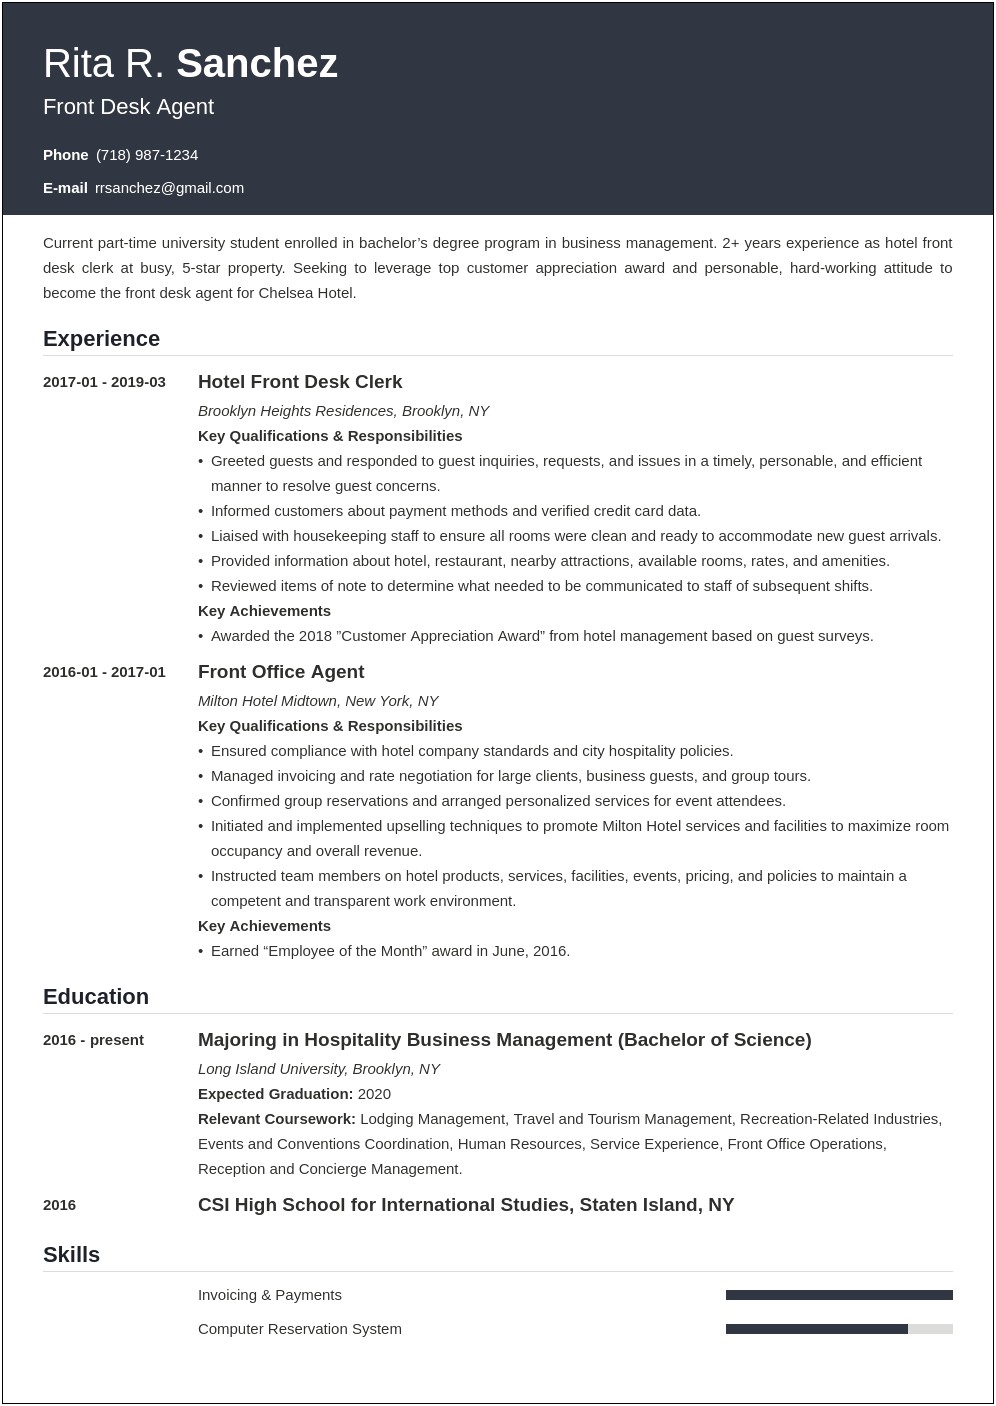 Resume Objective For A Front Desk Position